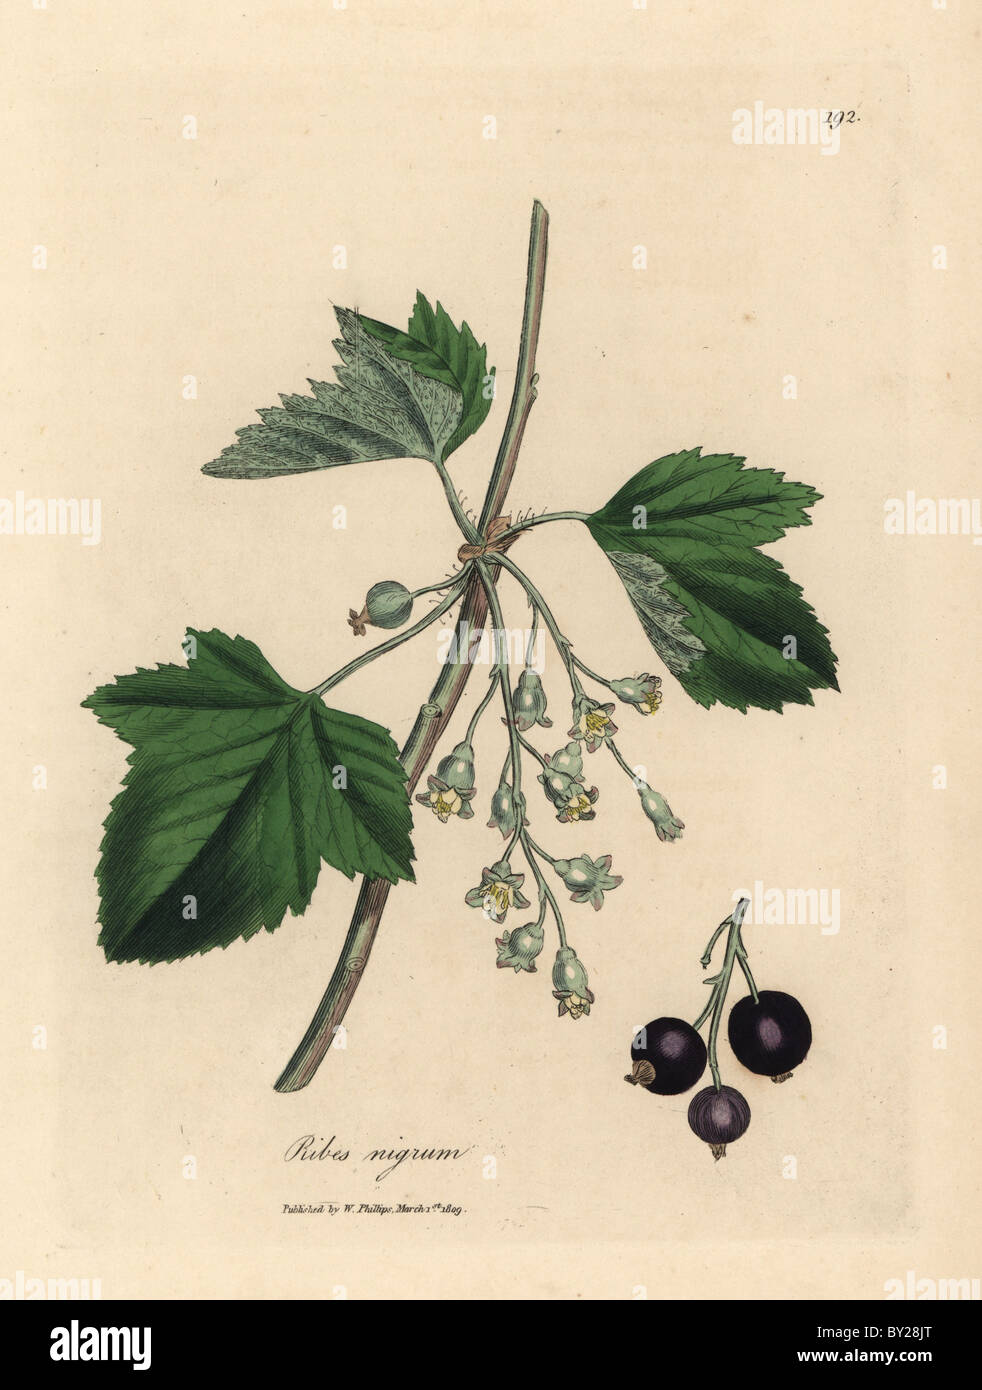 Blackcurrant tree, Ribes nigrum, with flowers, fruit and leaves. Stock Photo